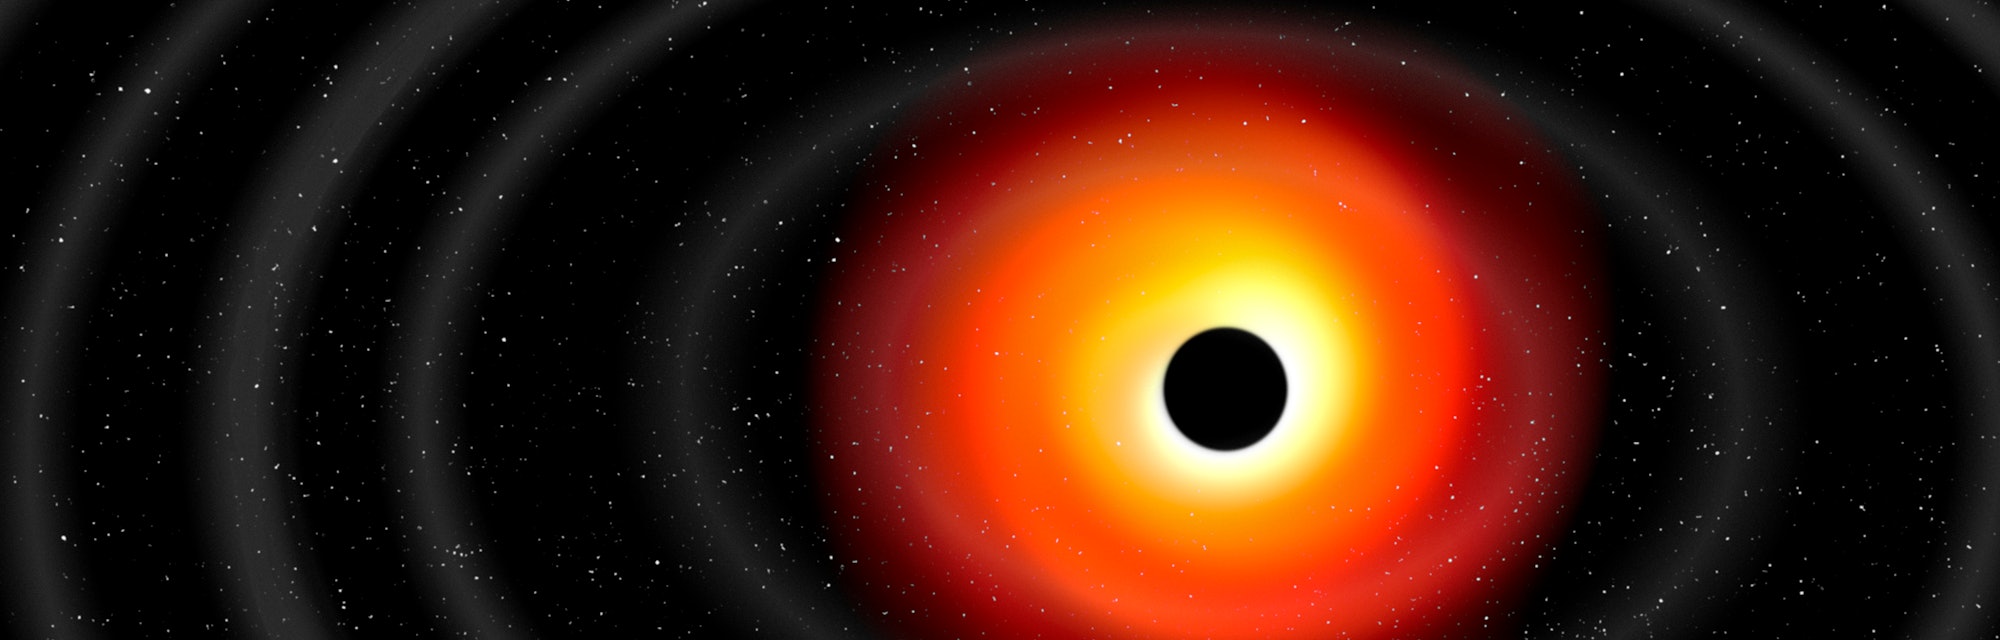 Gravitational waves from a black hole, illustration.